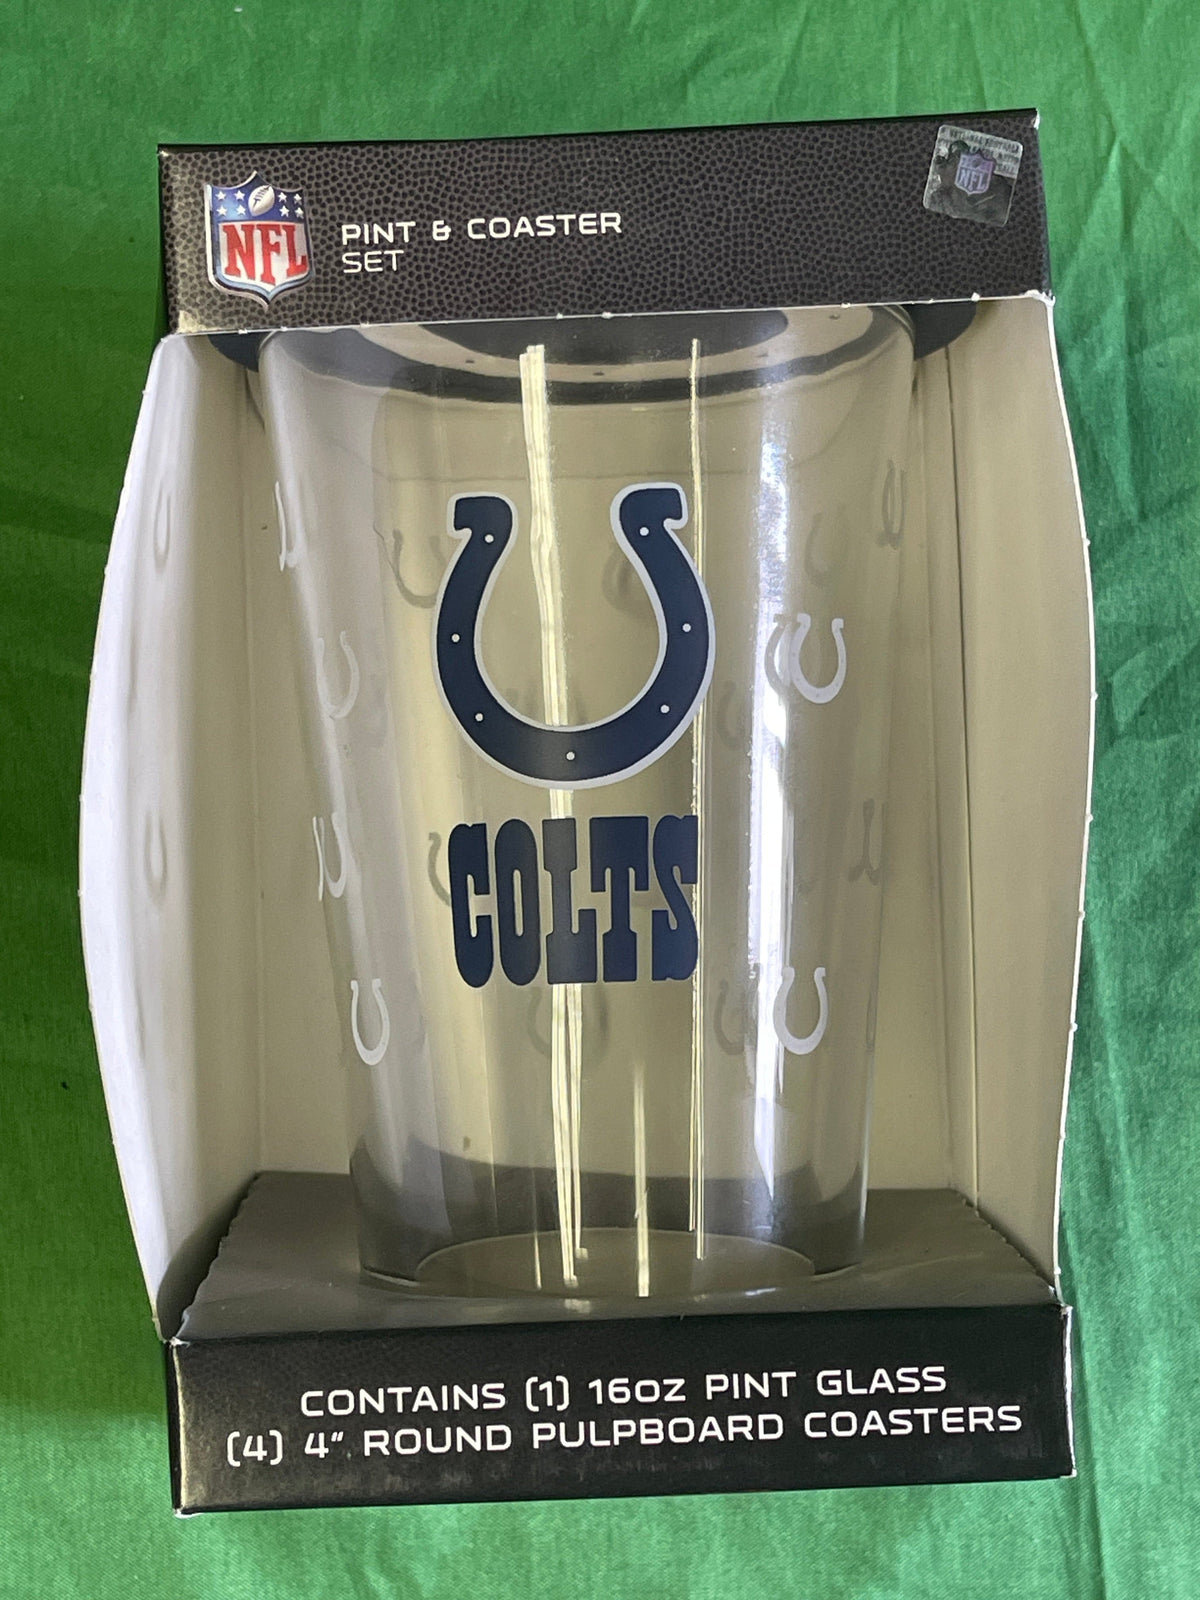 NFL Indianapolis Colts Pint Glass & Coaster Gift Set NWT